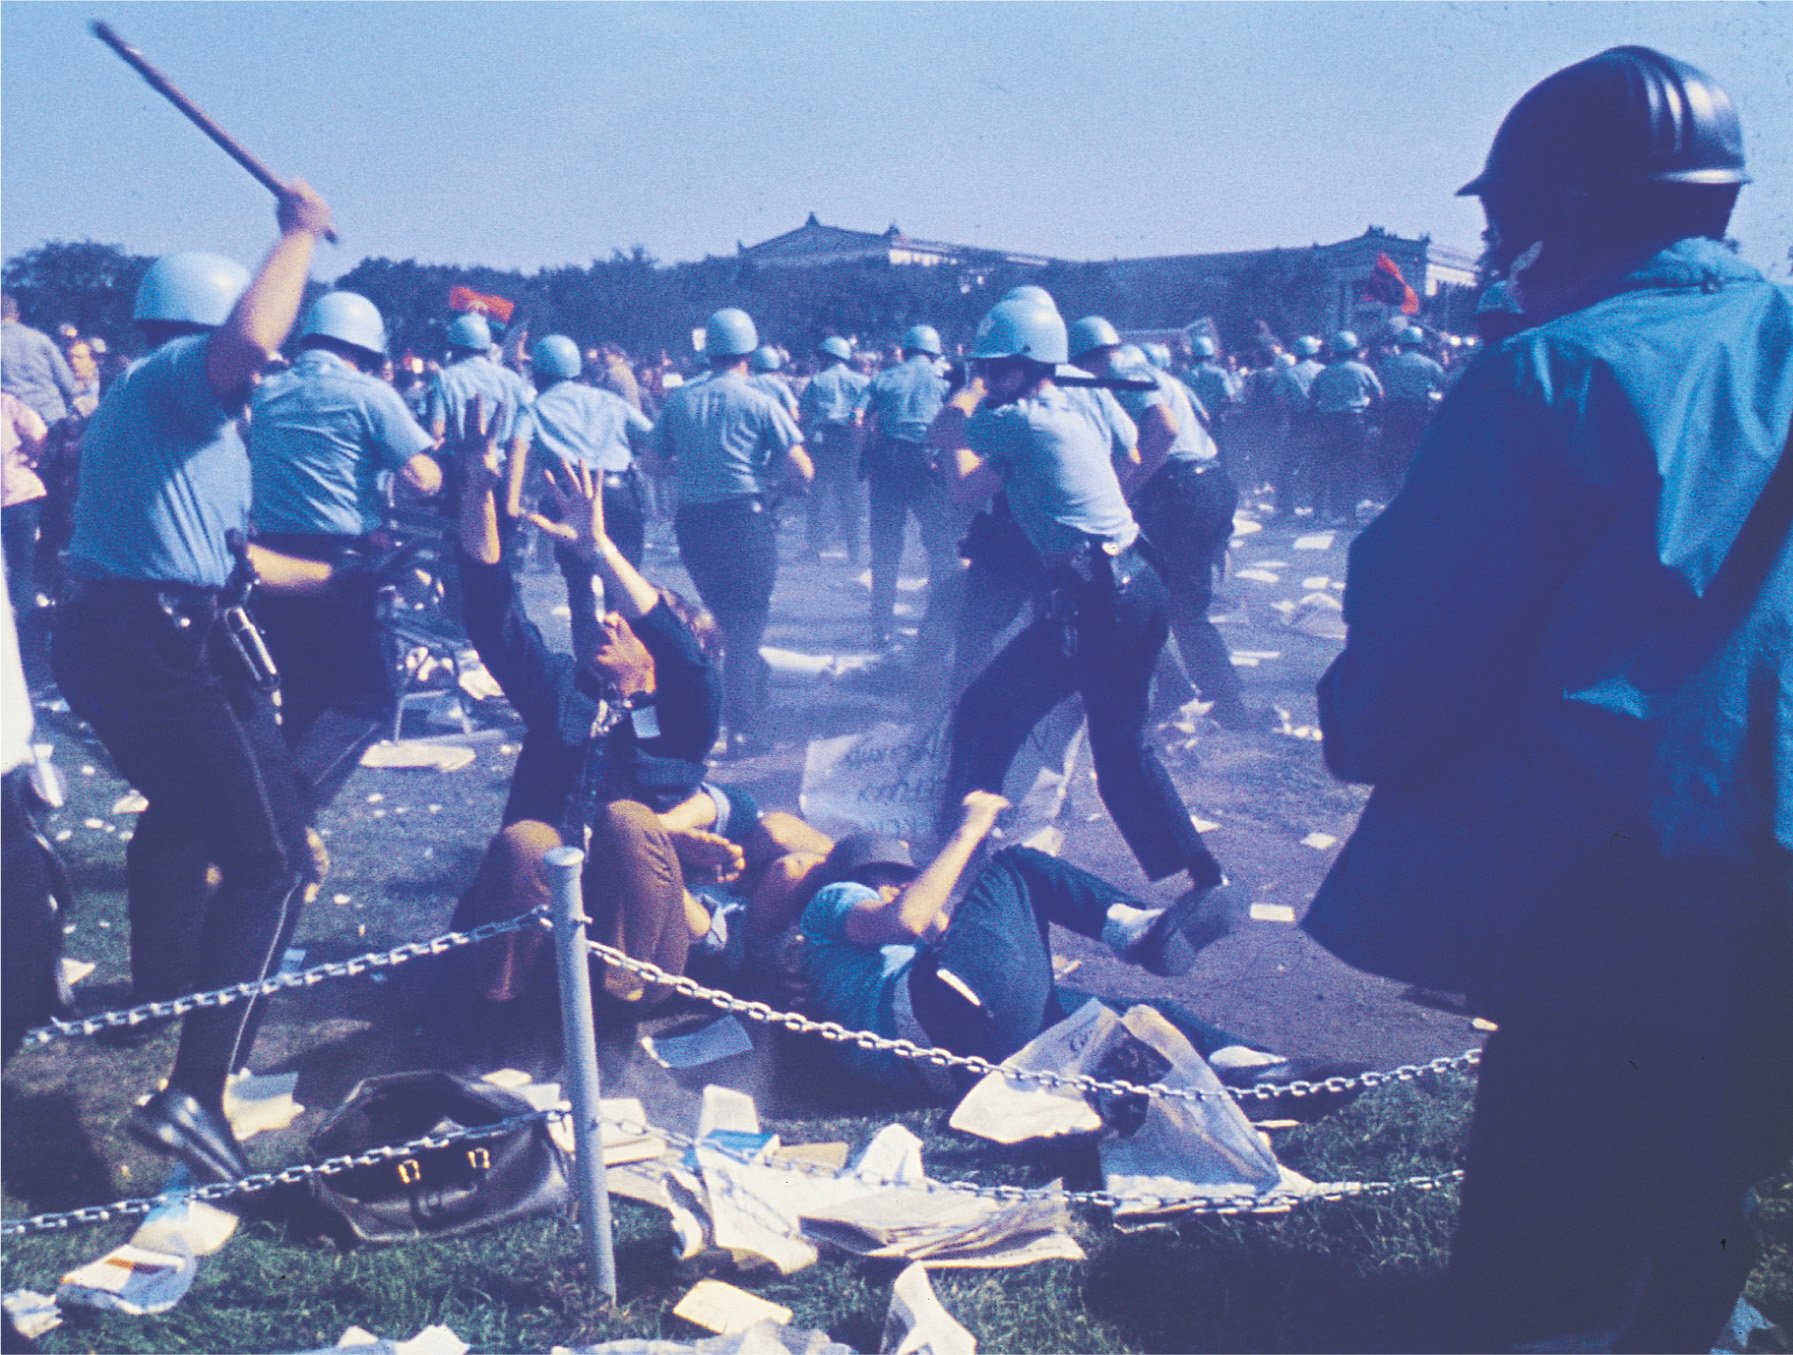 photo: police in helmets pummel protestors with clubs.